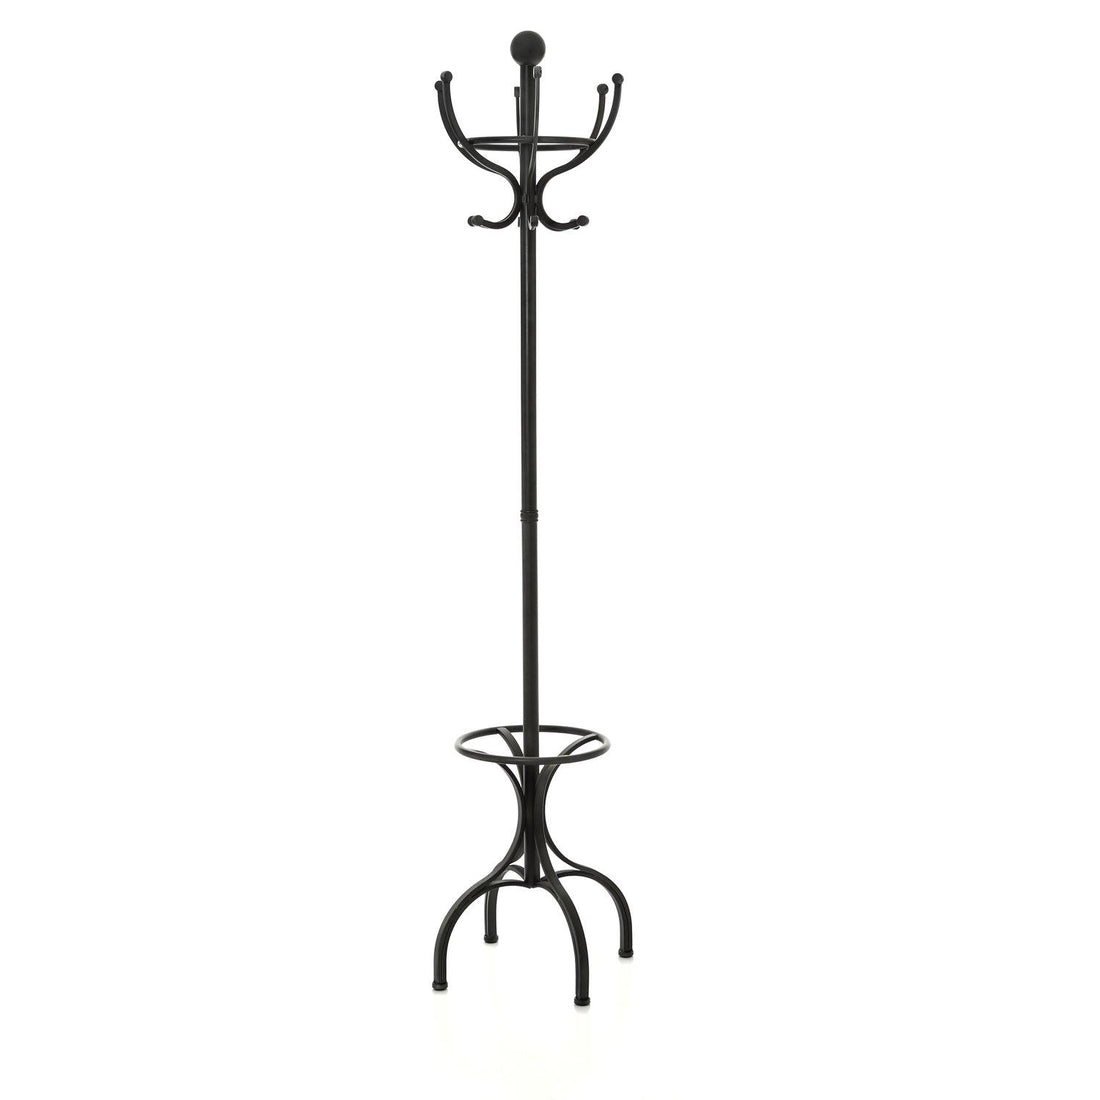 Grey Hat & Coat Stand - £194.95 - Gifts & Accessories > Hat, Coat And Umbrella Stands 